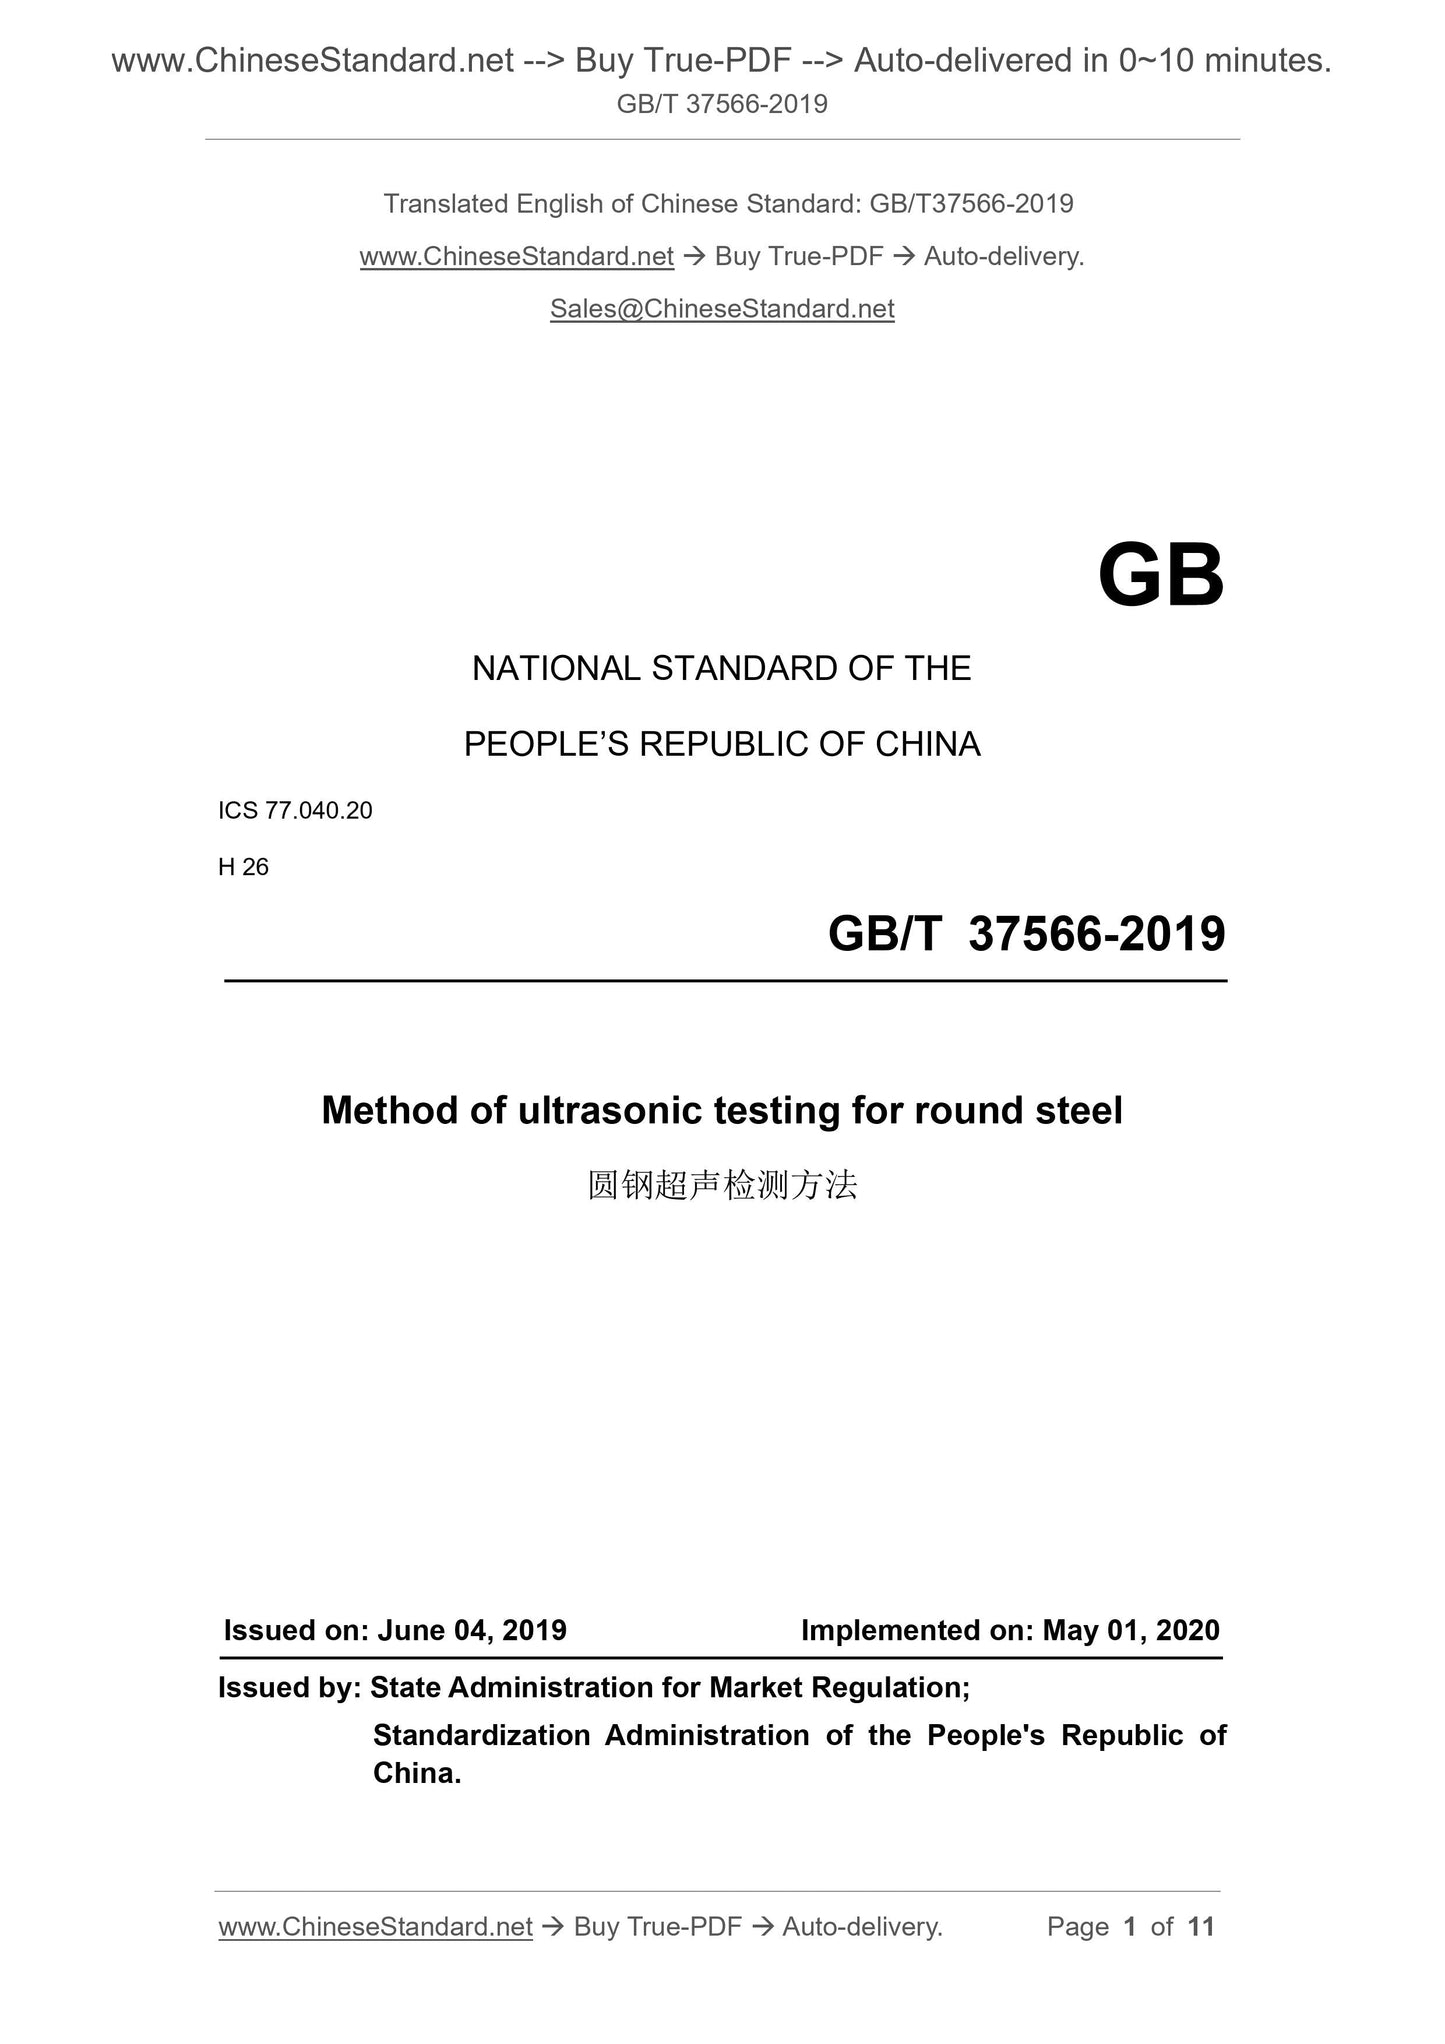 GB/T 37566-2019 Page 1